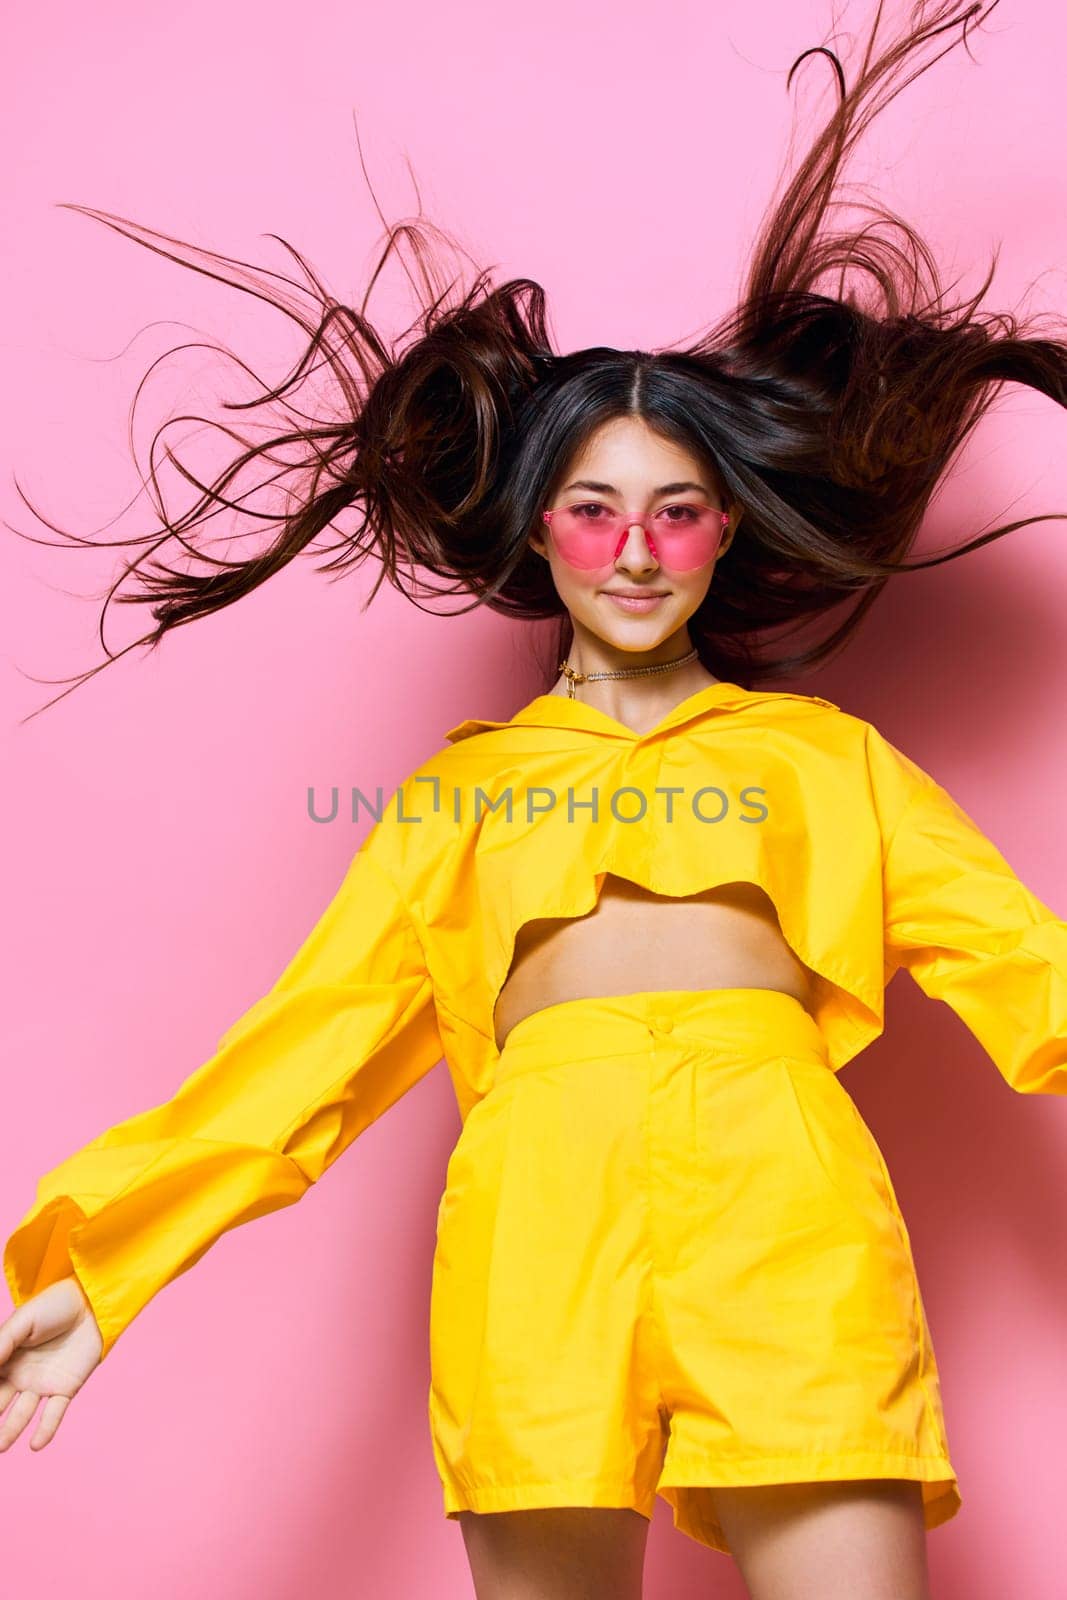 woman style yellow girl background hairstyle trendy lifestyle cheerful beautiful caucasian fashion creative romance sunglasses emotion happy model happiness attractive young